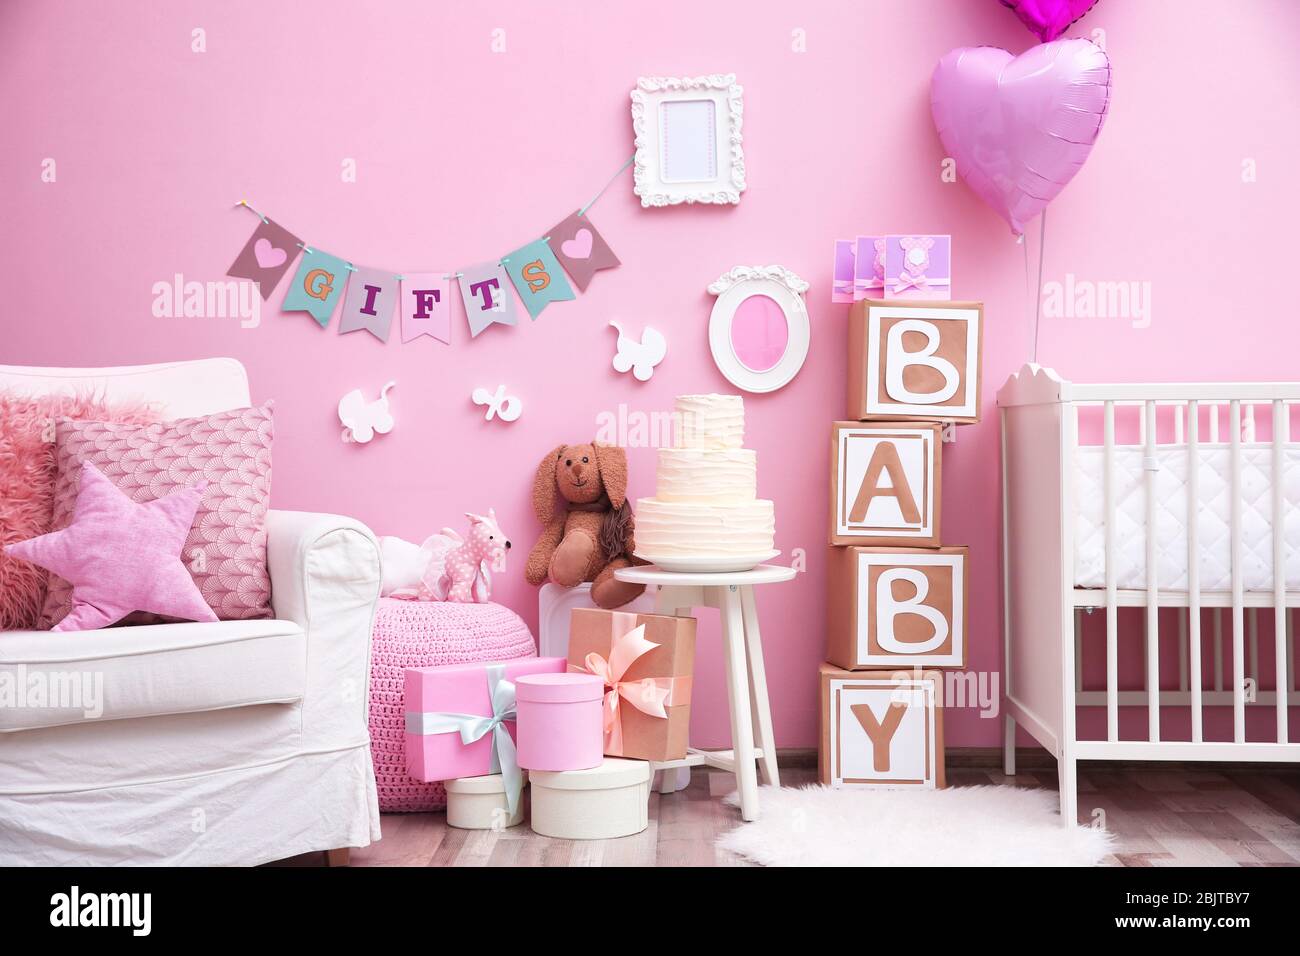 Beautiful decorations for baby shower party in room Stock Photo - Alamy